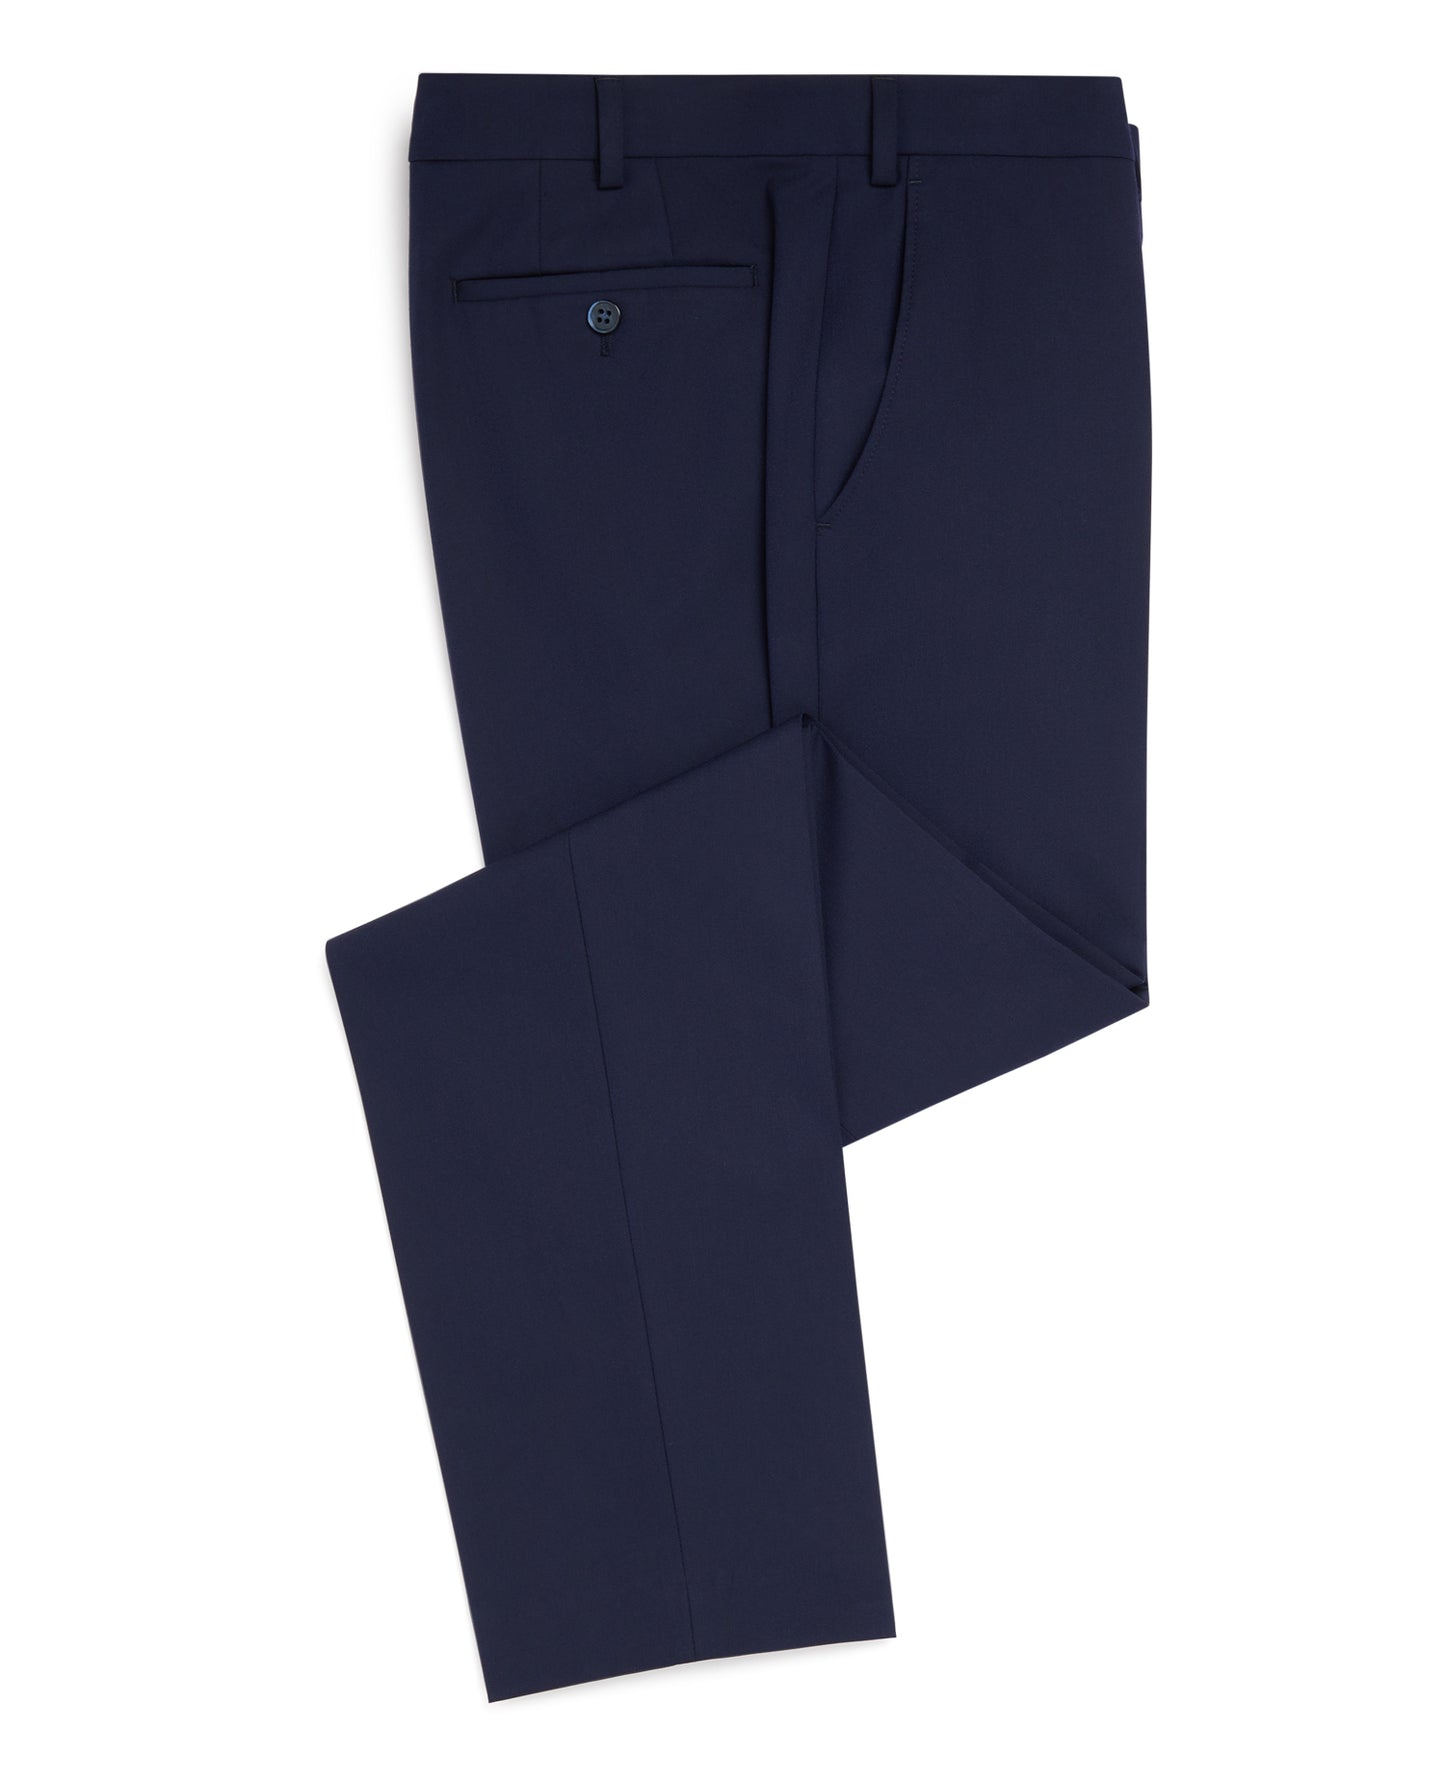 Slim Fit Polyviscose Suit Jacket - French Navy